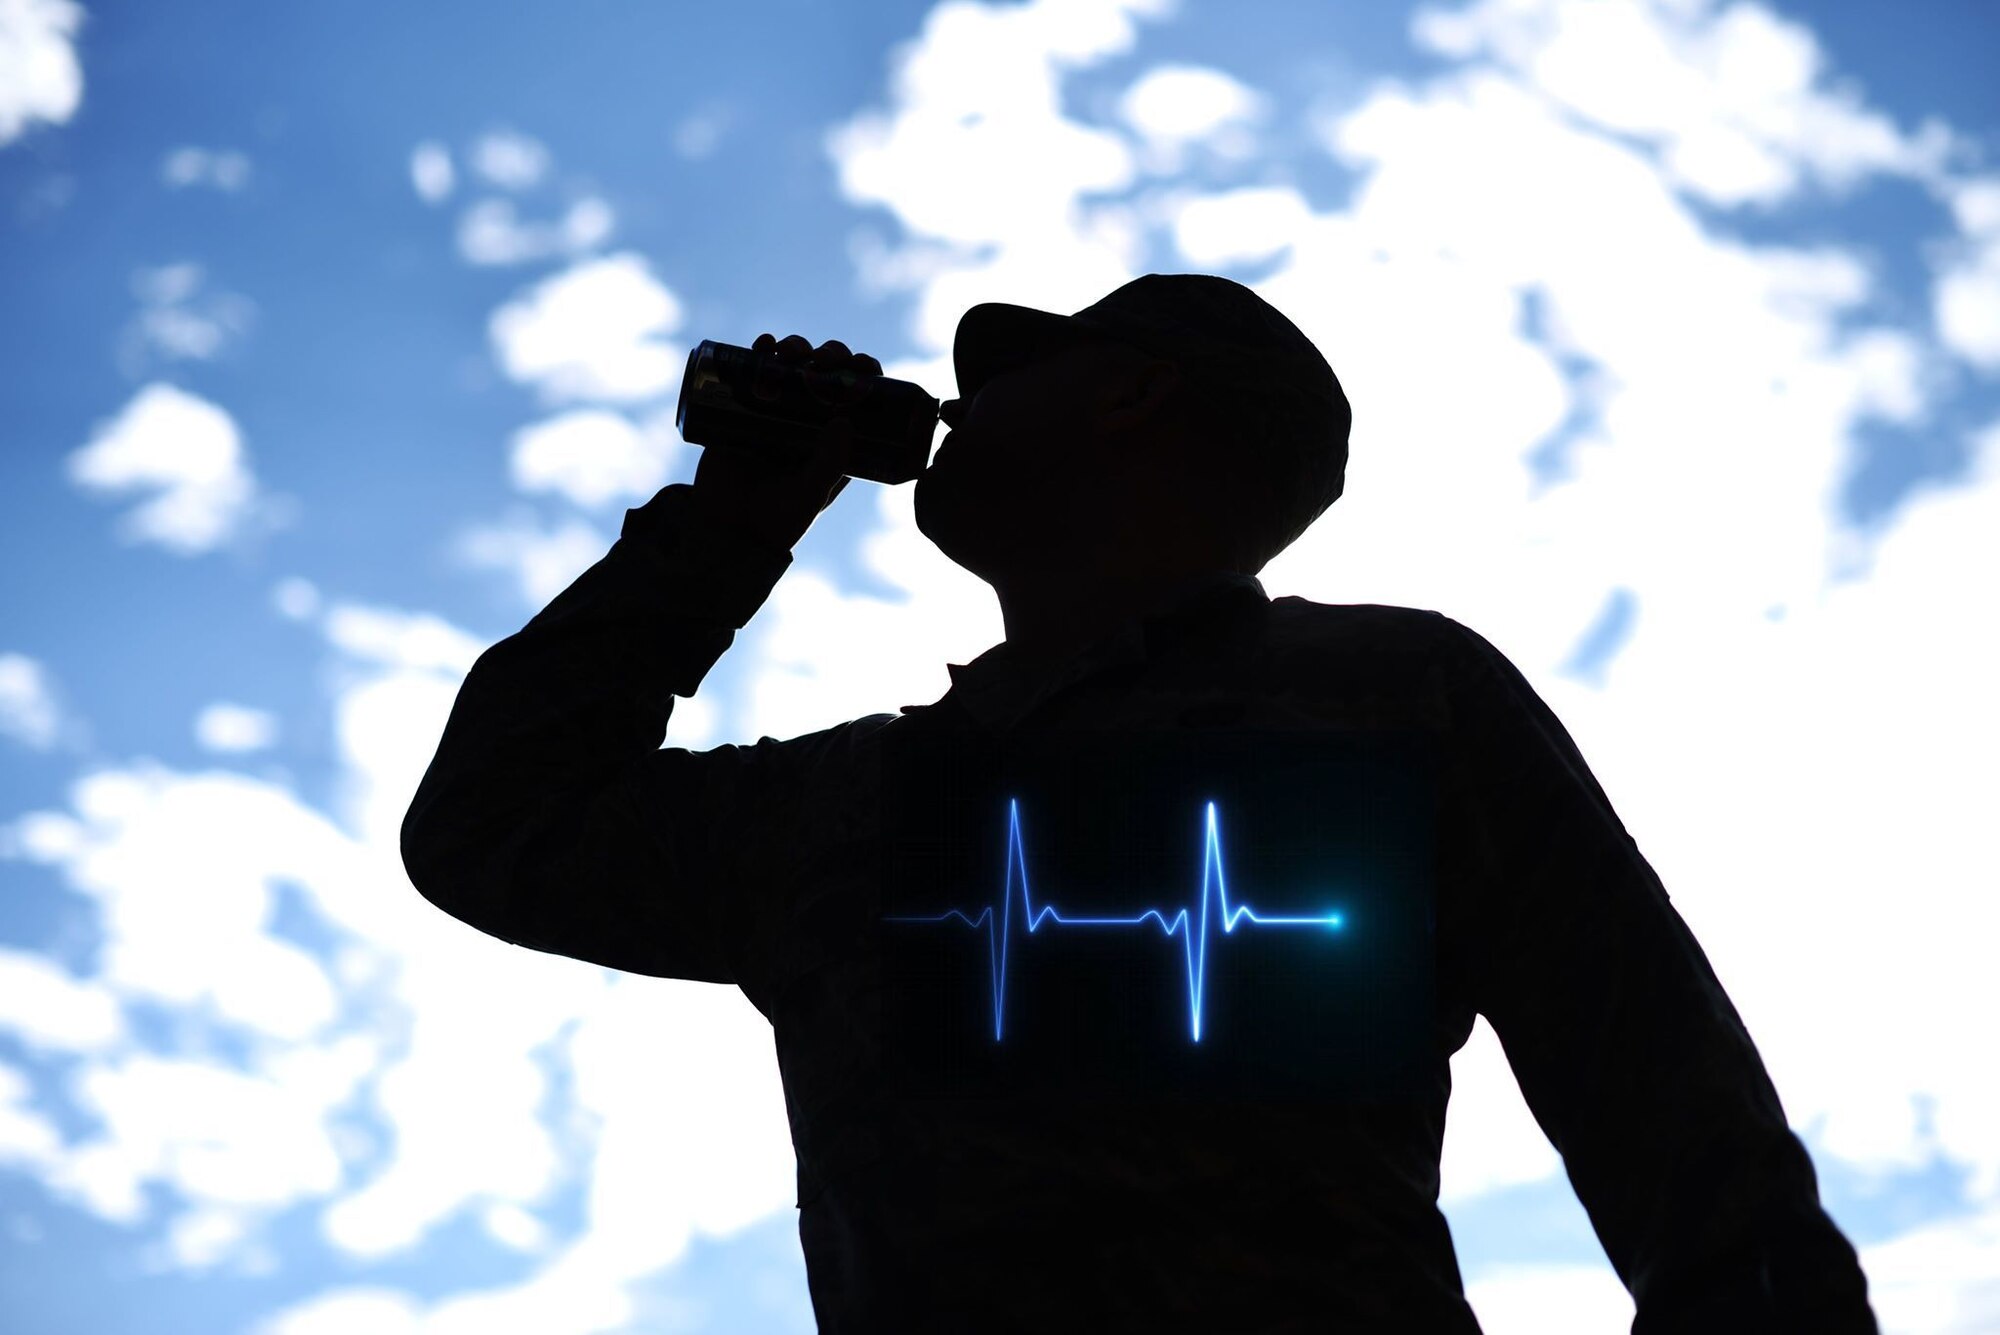 In a study published by the American Heart Association, energy drinks may abnormally impact the heart rhythm and raise blood pressure in people as young as 18 years of age.